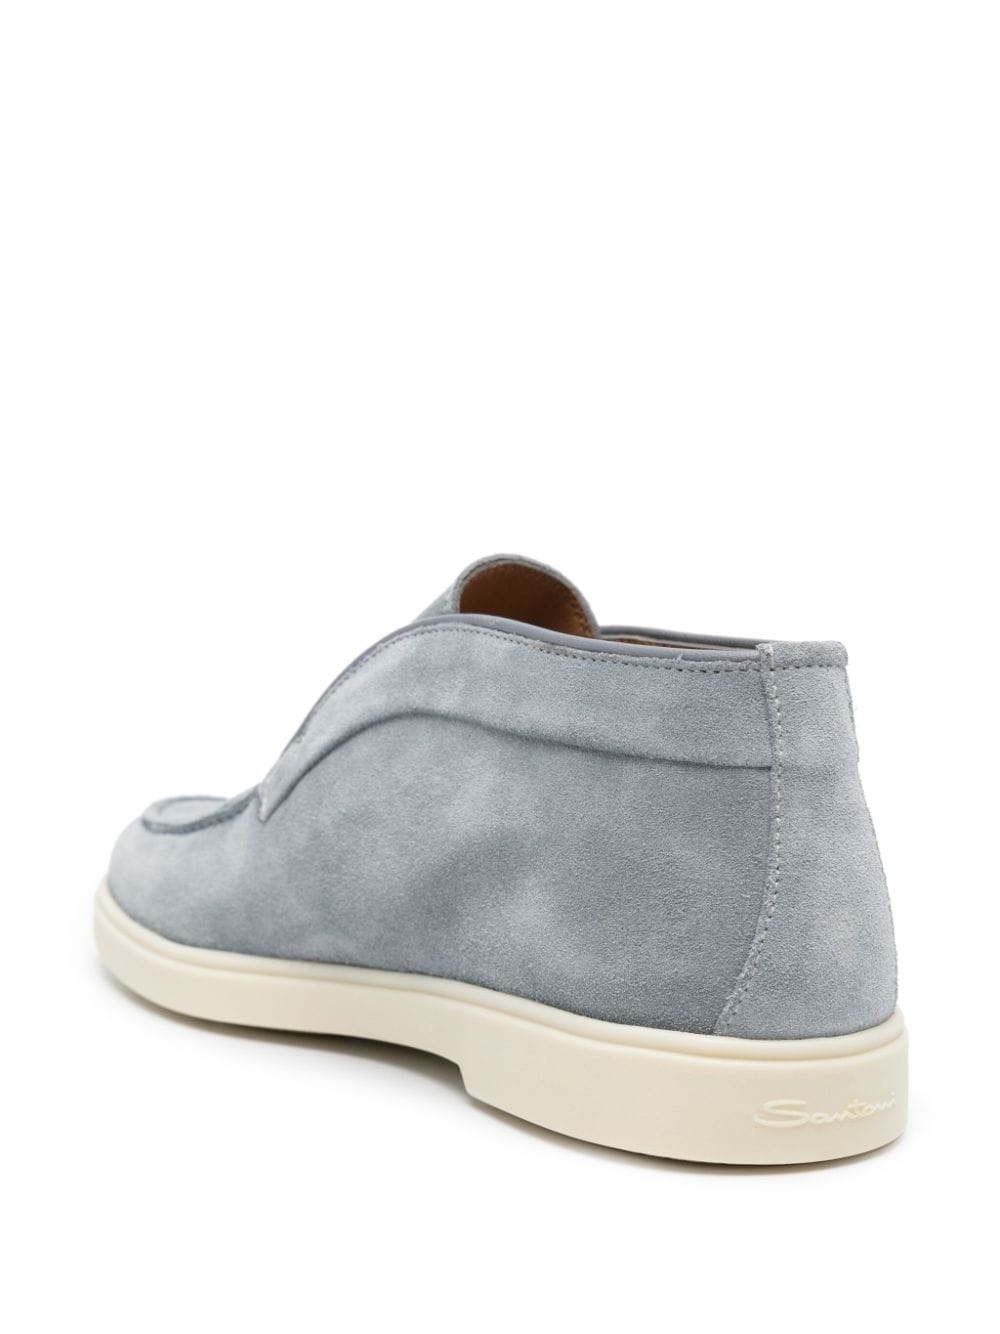 slip-on suede boots - 3